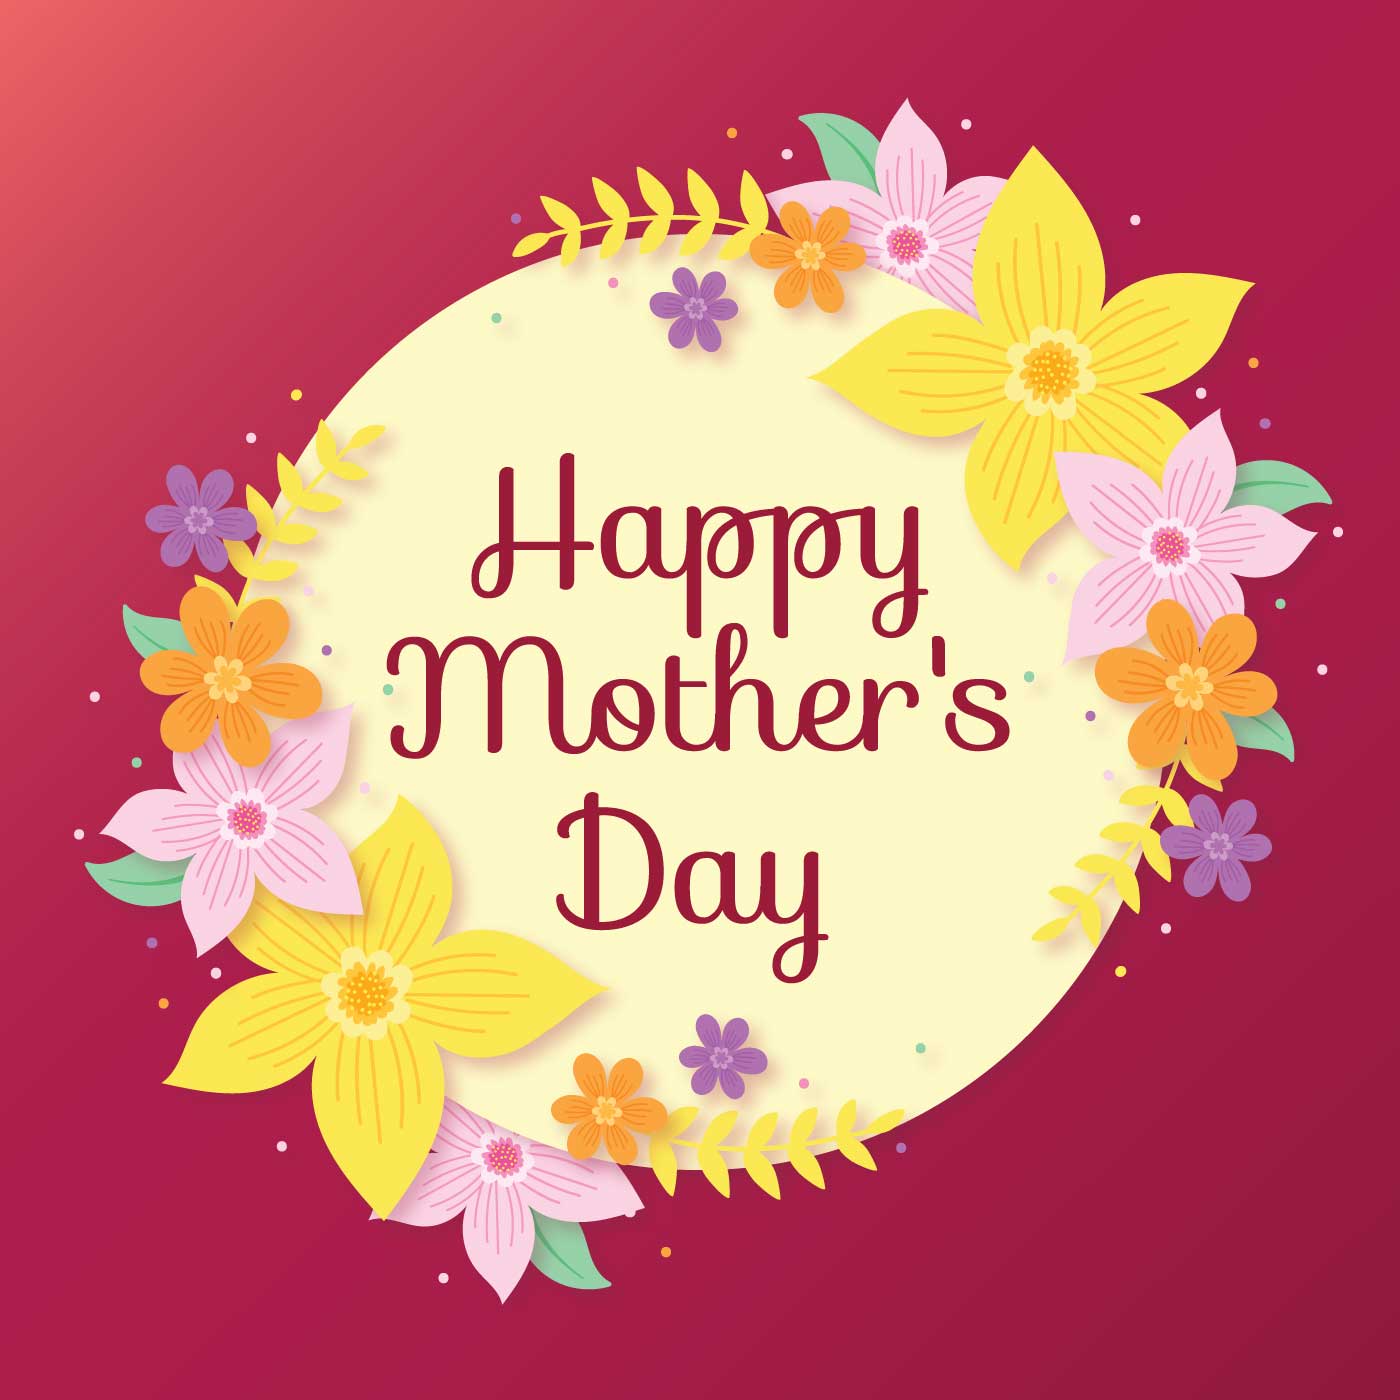 Happy Mothers Day Card - Download Free Vectors, Clipart Graphics ...